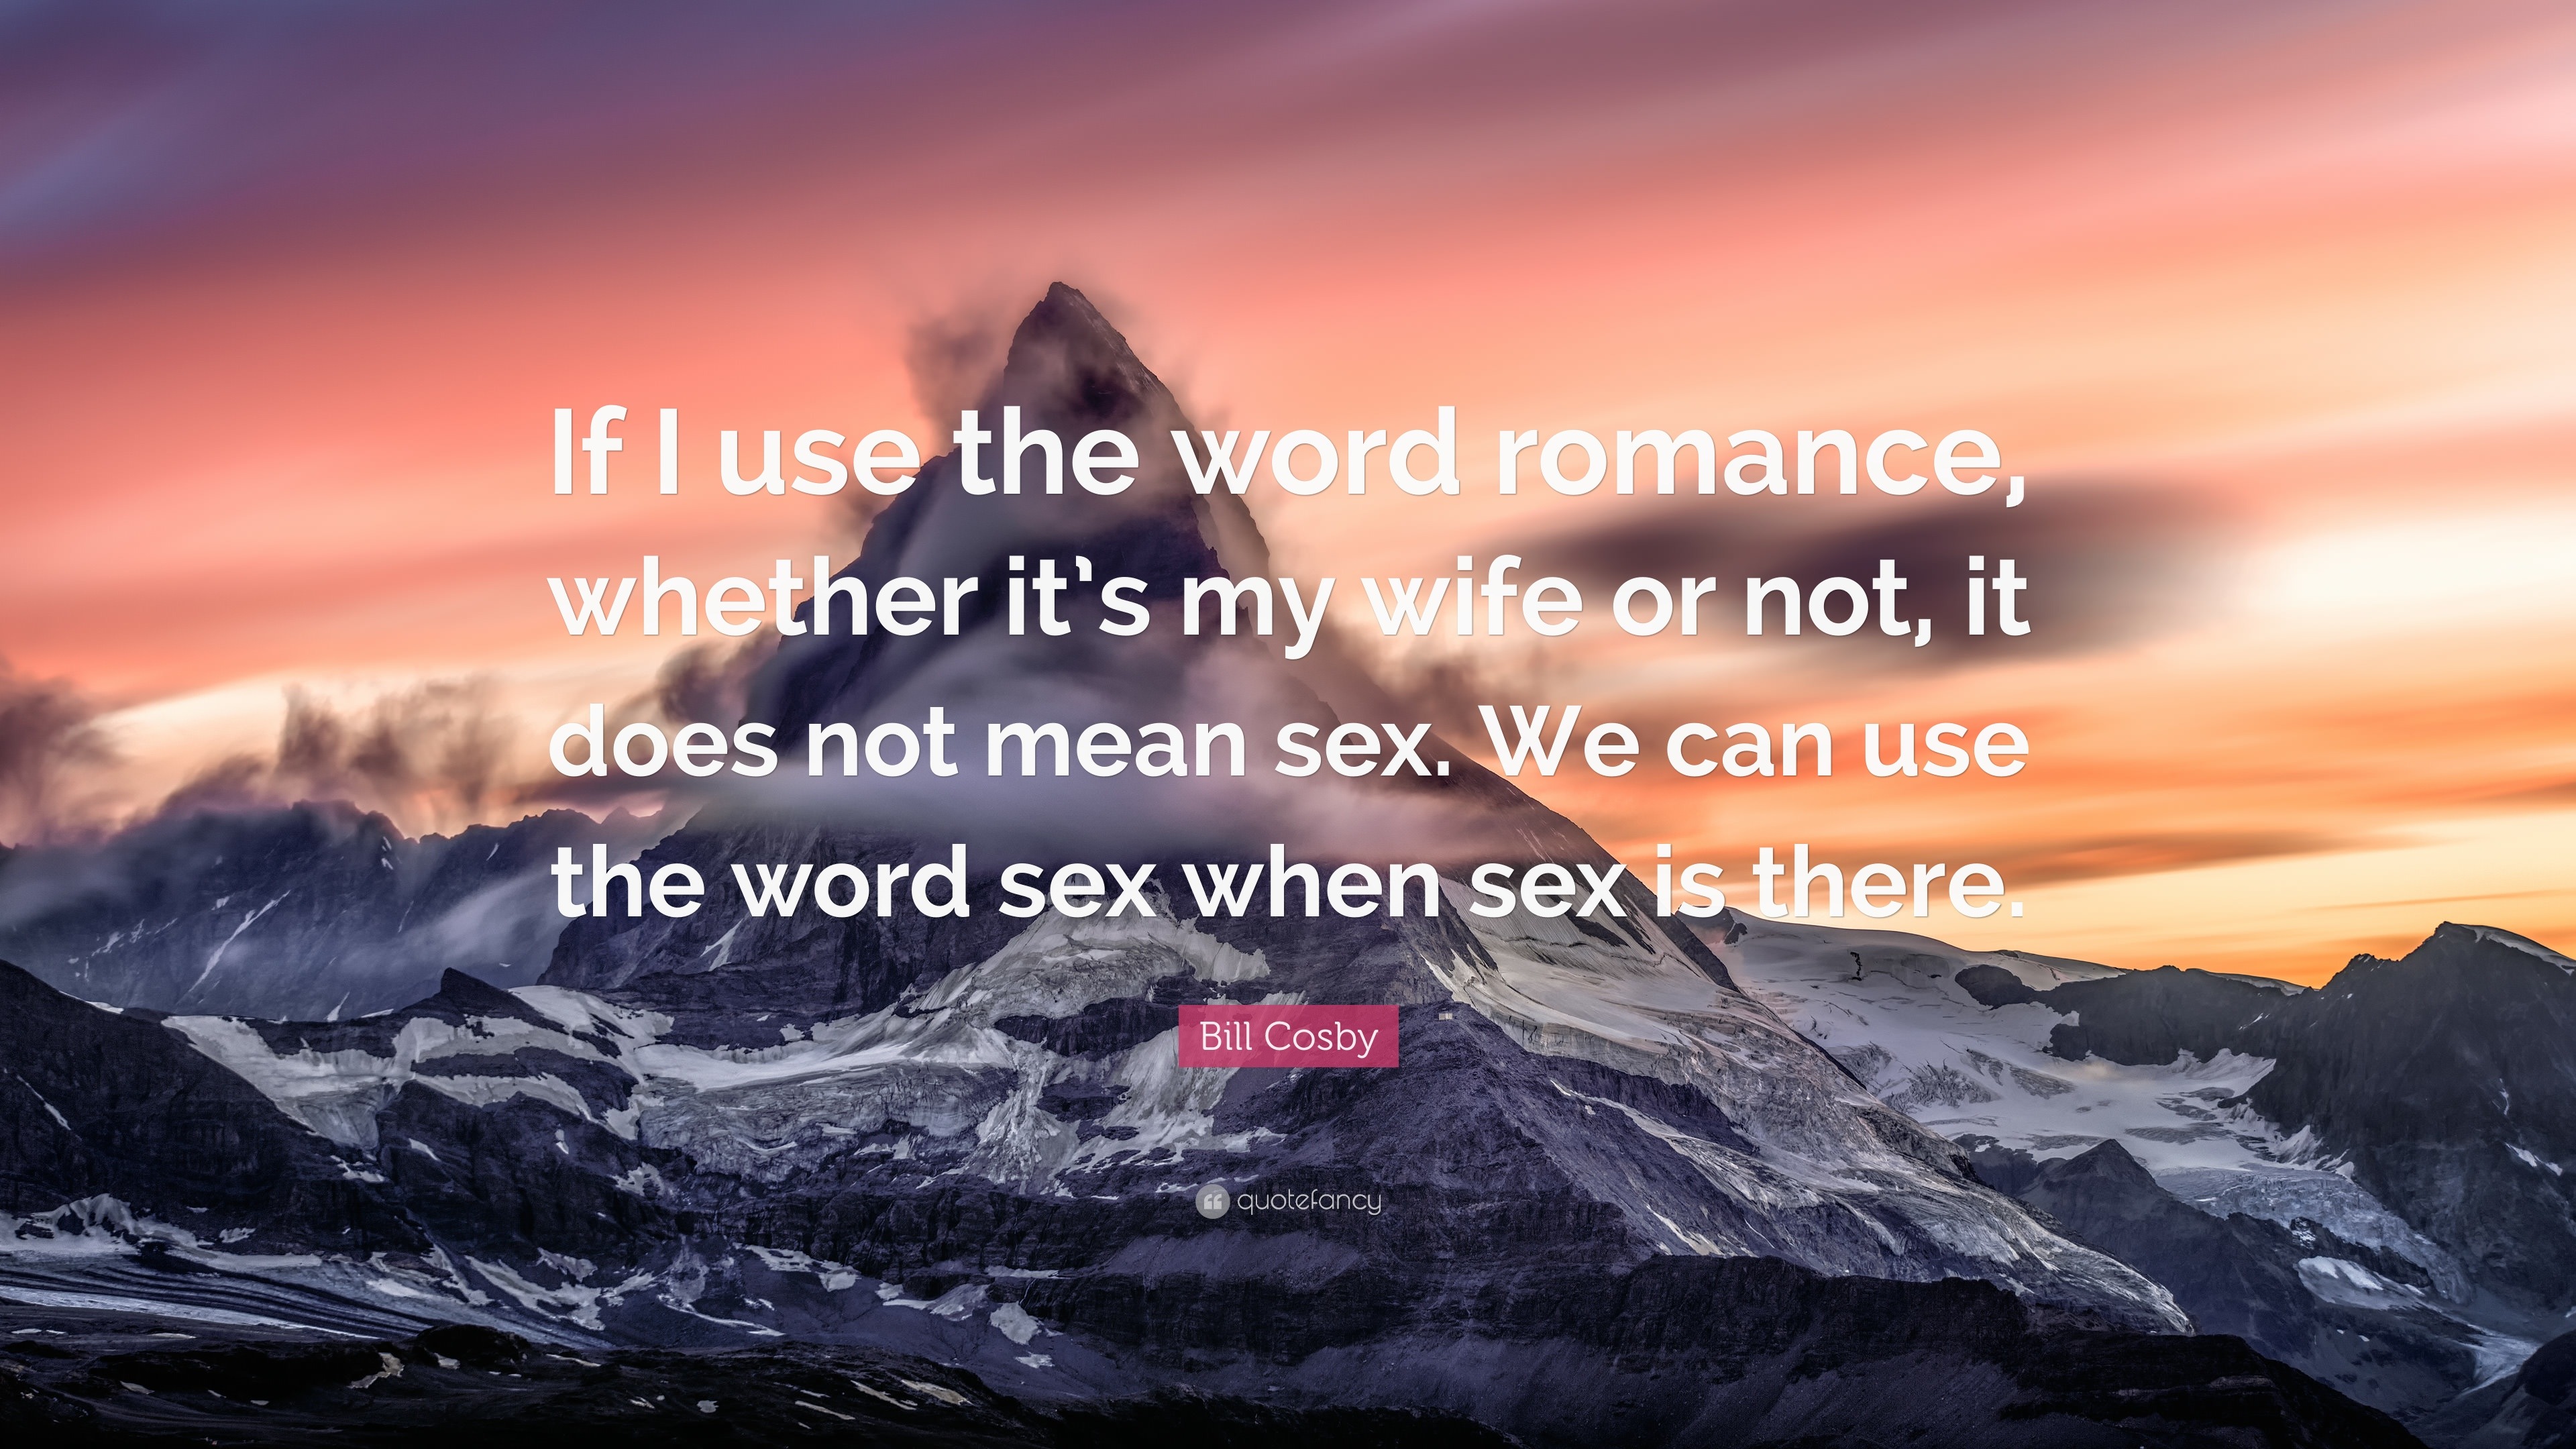 Bill Cosby Quote “if I Use The Word Romance Whether It’s